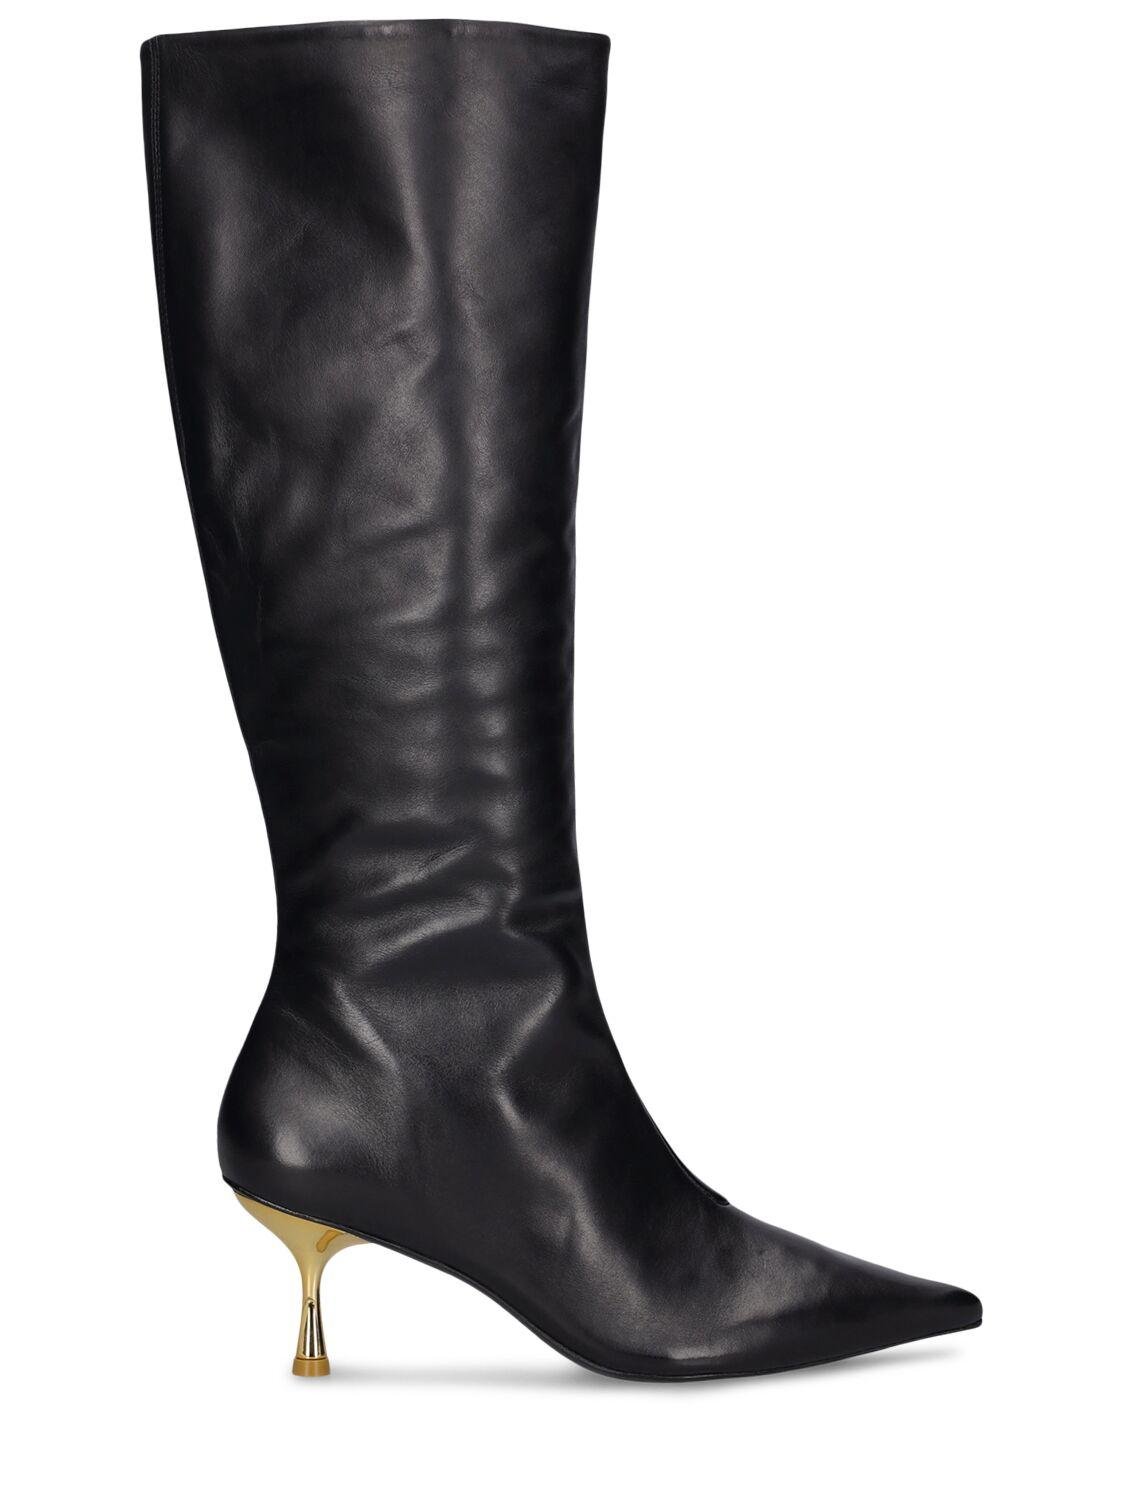 65mm Leather Tall Boots by SIMKHAI